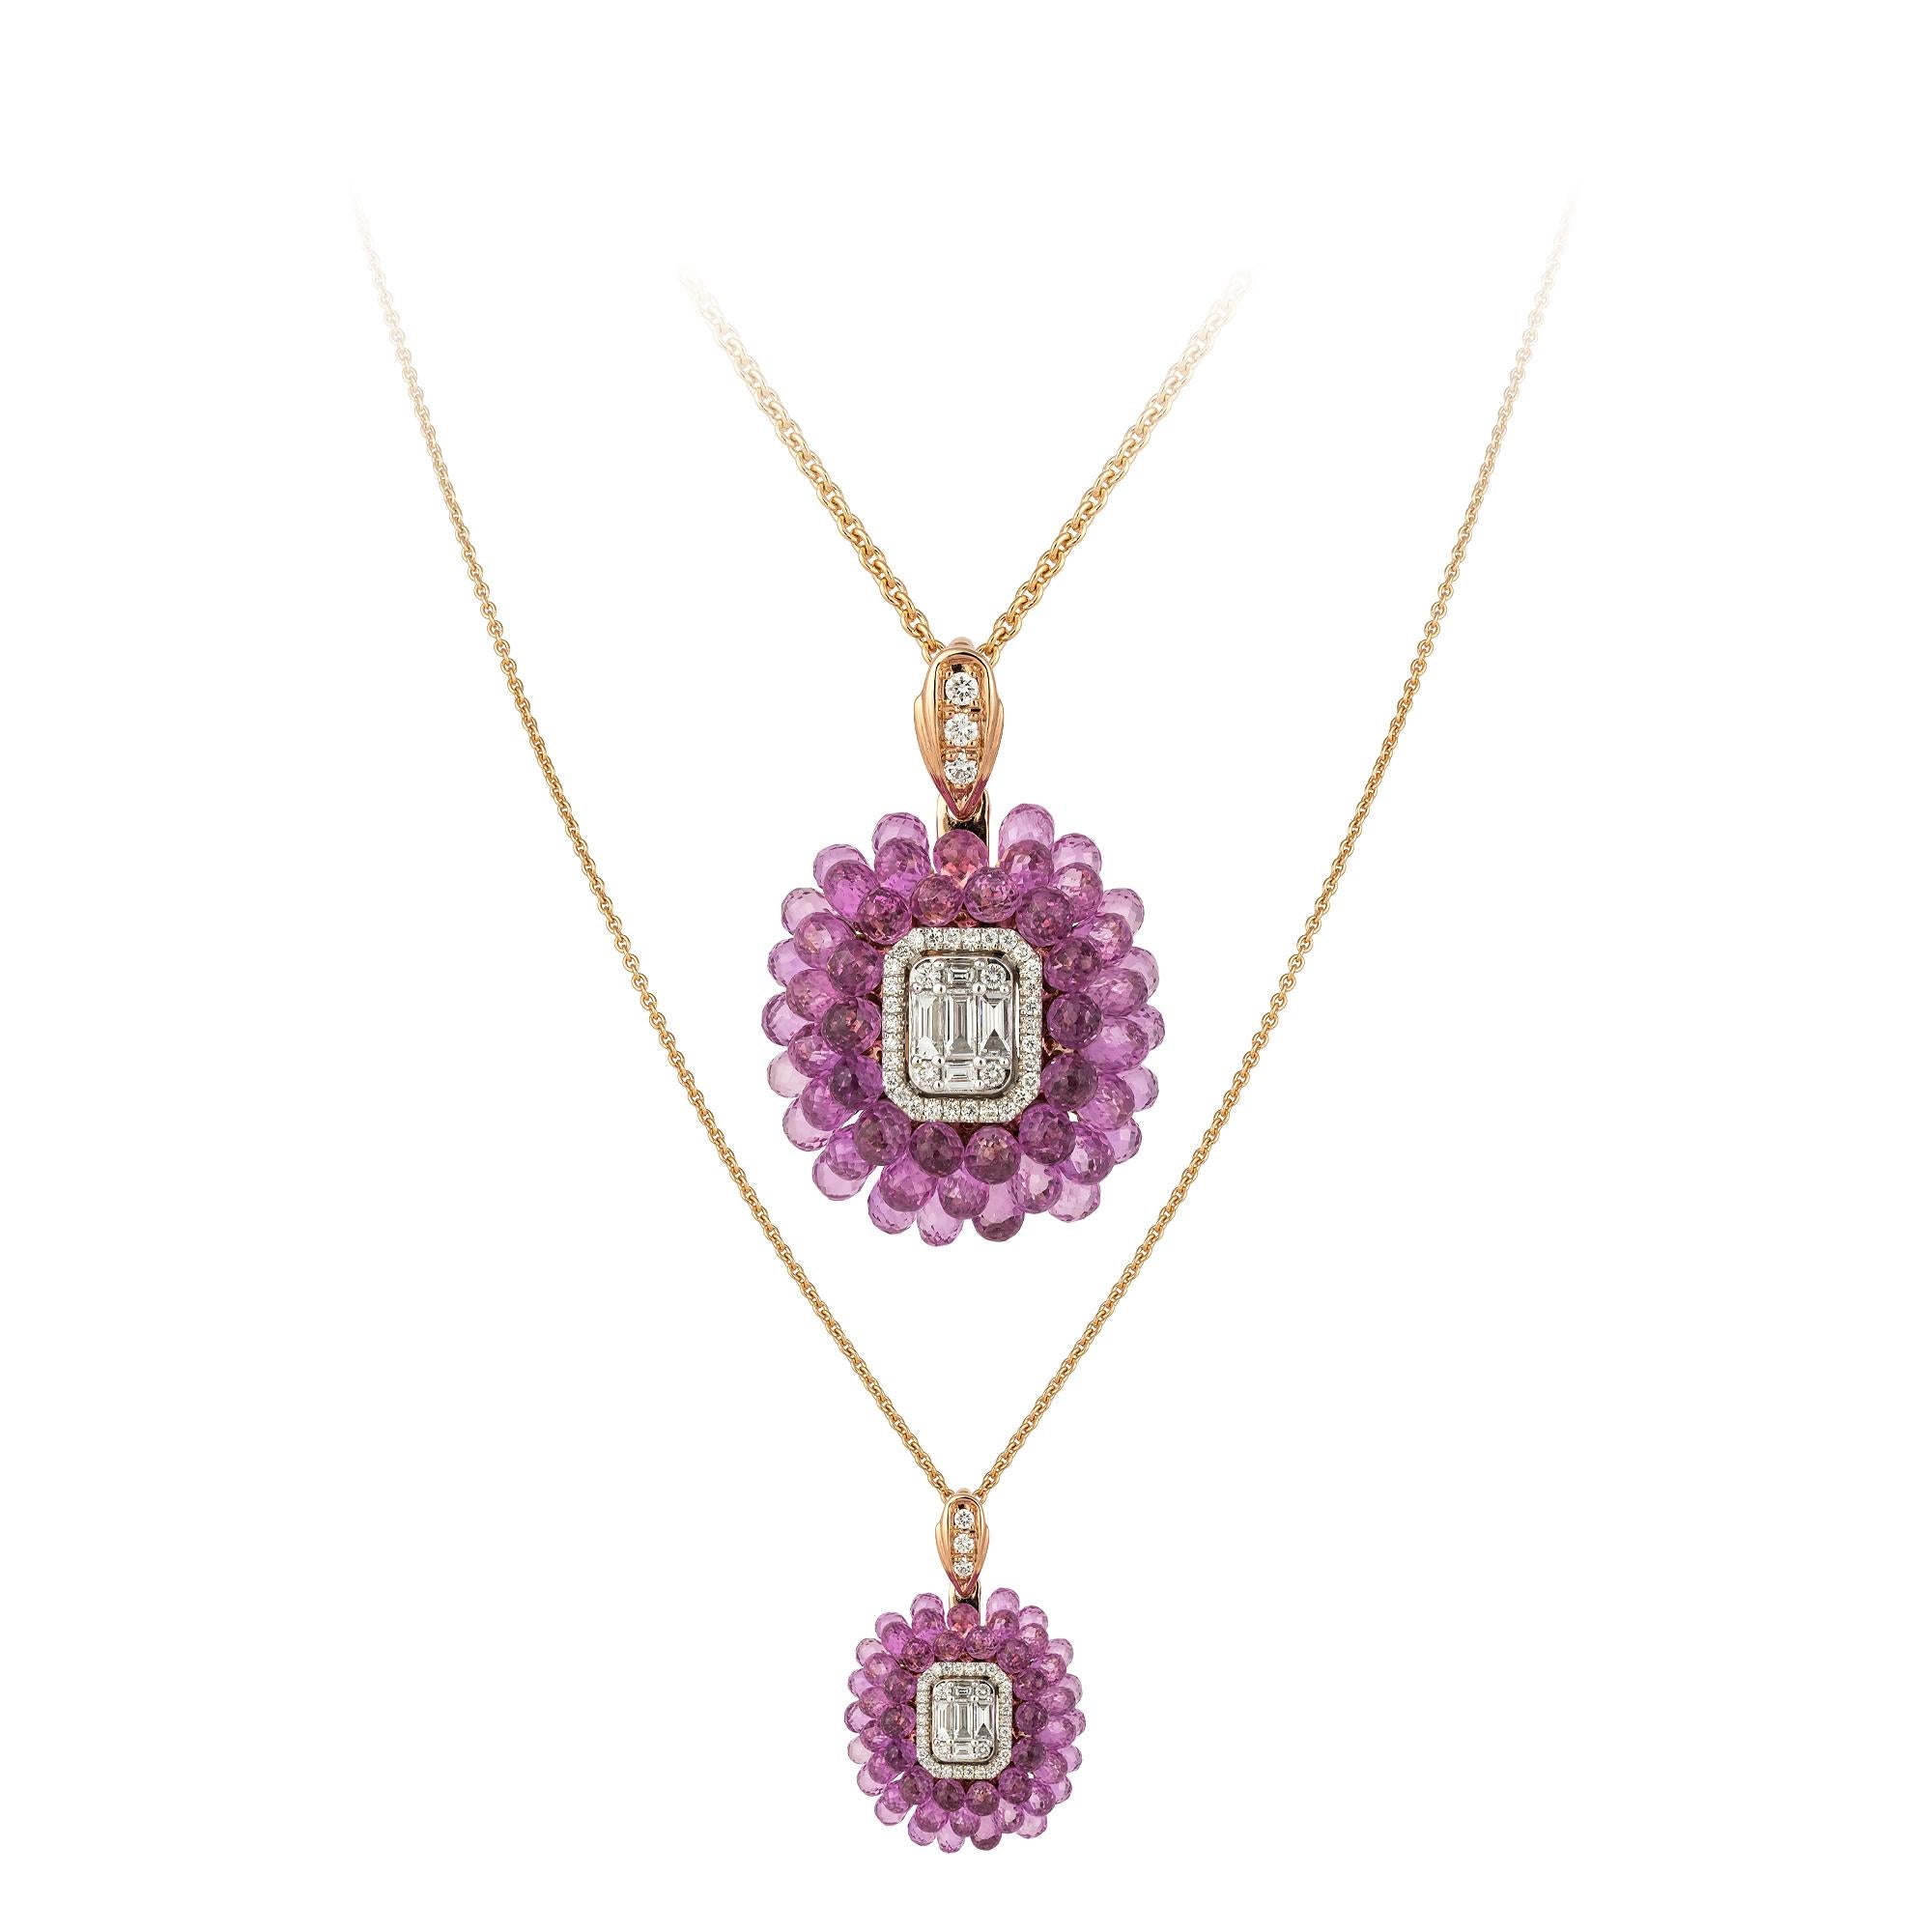 NECKLACE 18K White Gold
Diamond 0.19 Cts/37 Pcs 
Pink Sapphire 14.84 Cts/51 Pcs 
TB 0.22 Cts/5 Pcs

With a heritage of ancient fine Swiss jewelry traditions, NATKINA is a Geneva based jewellery brand, which creates modern jewellery masterpieces